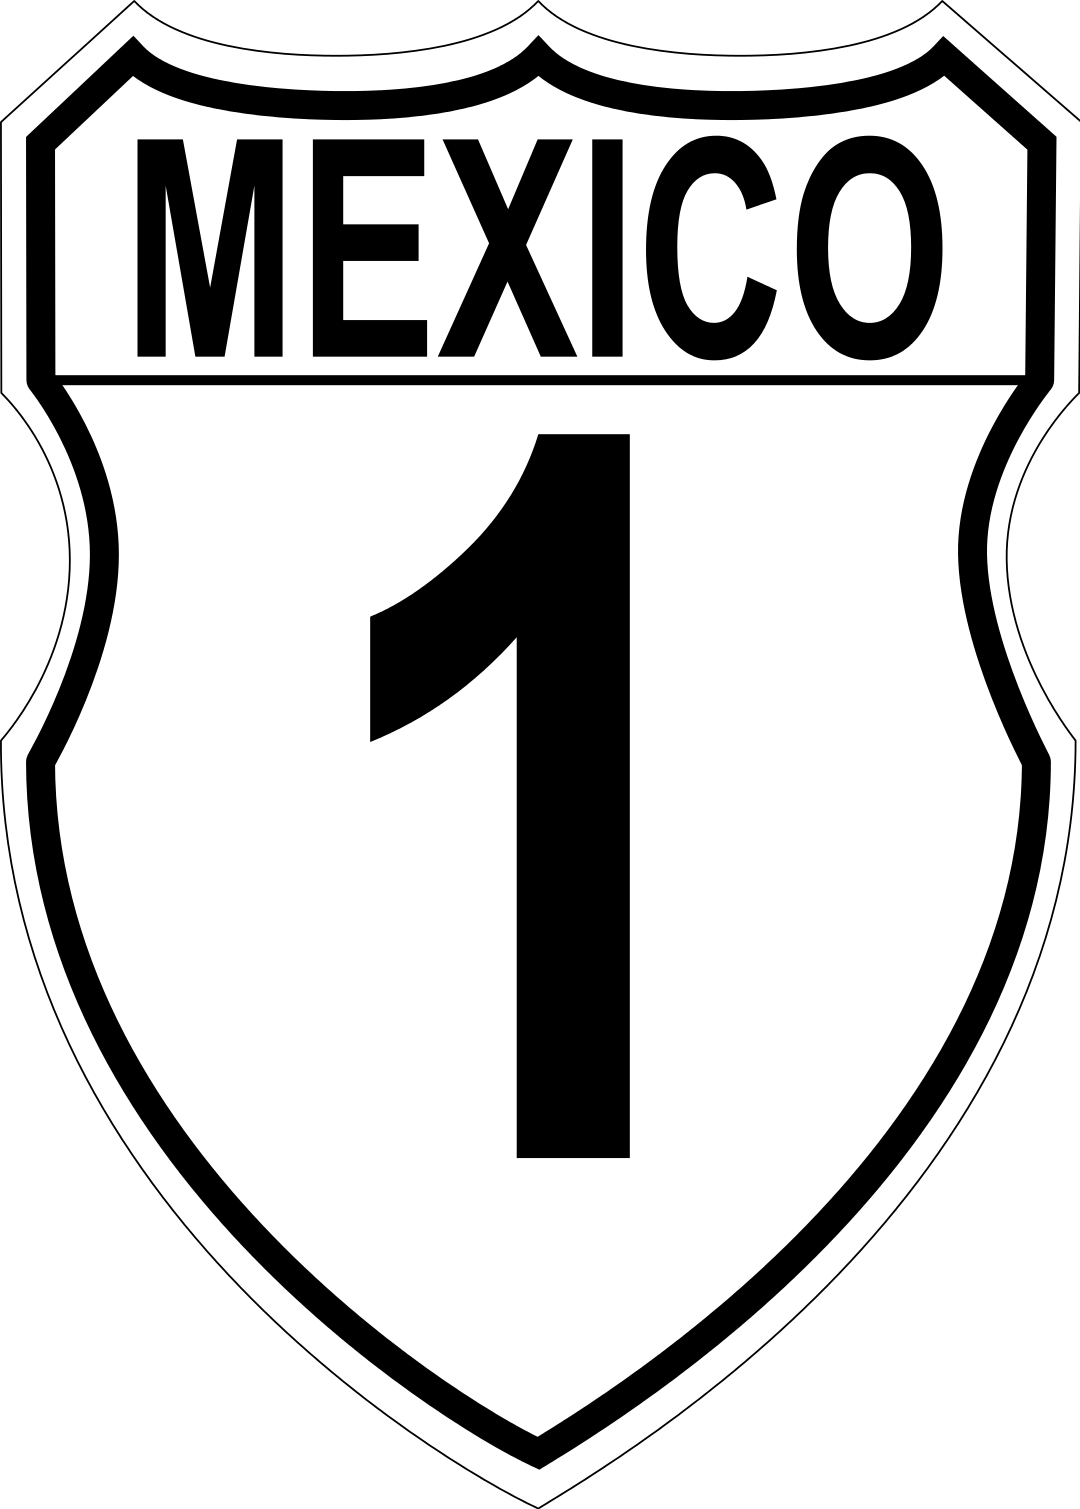 Mexico Federal Highway - Highway (1080x1509)